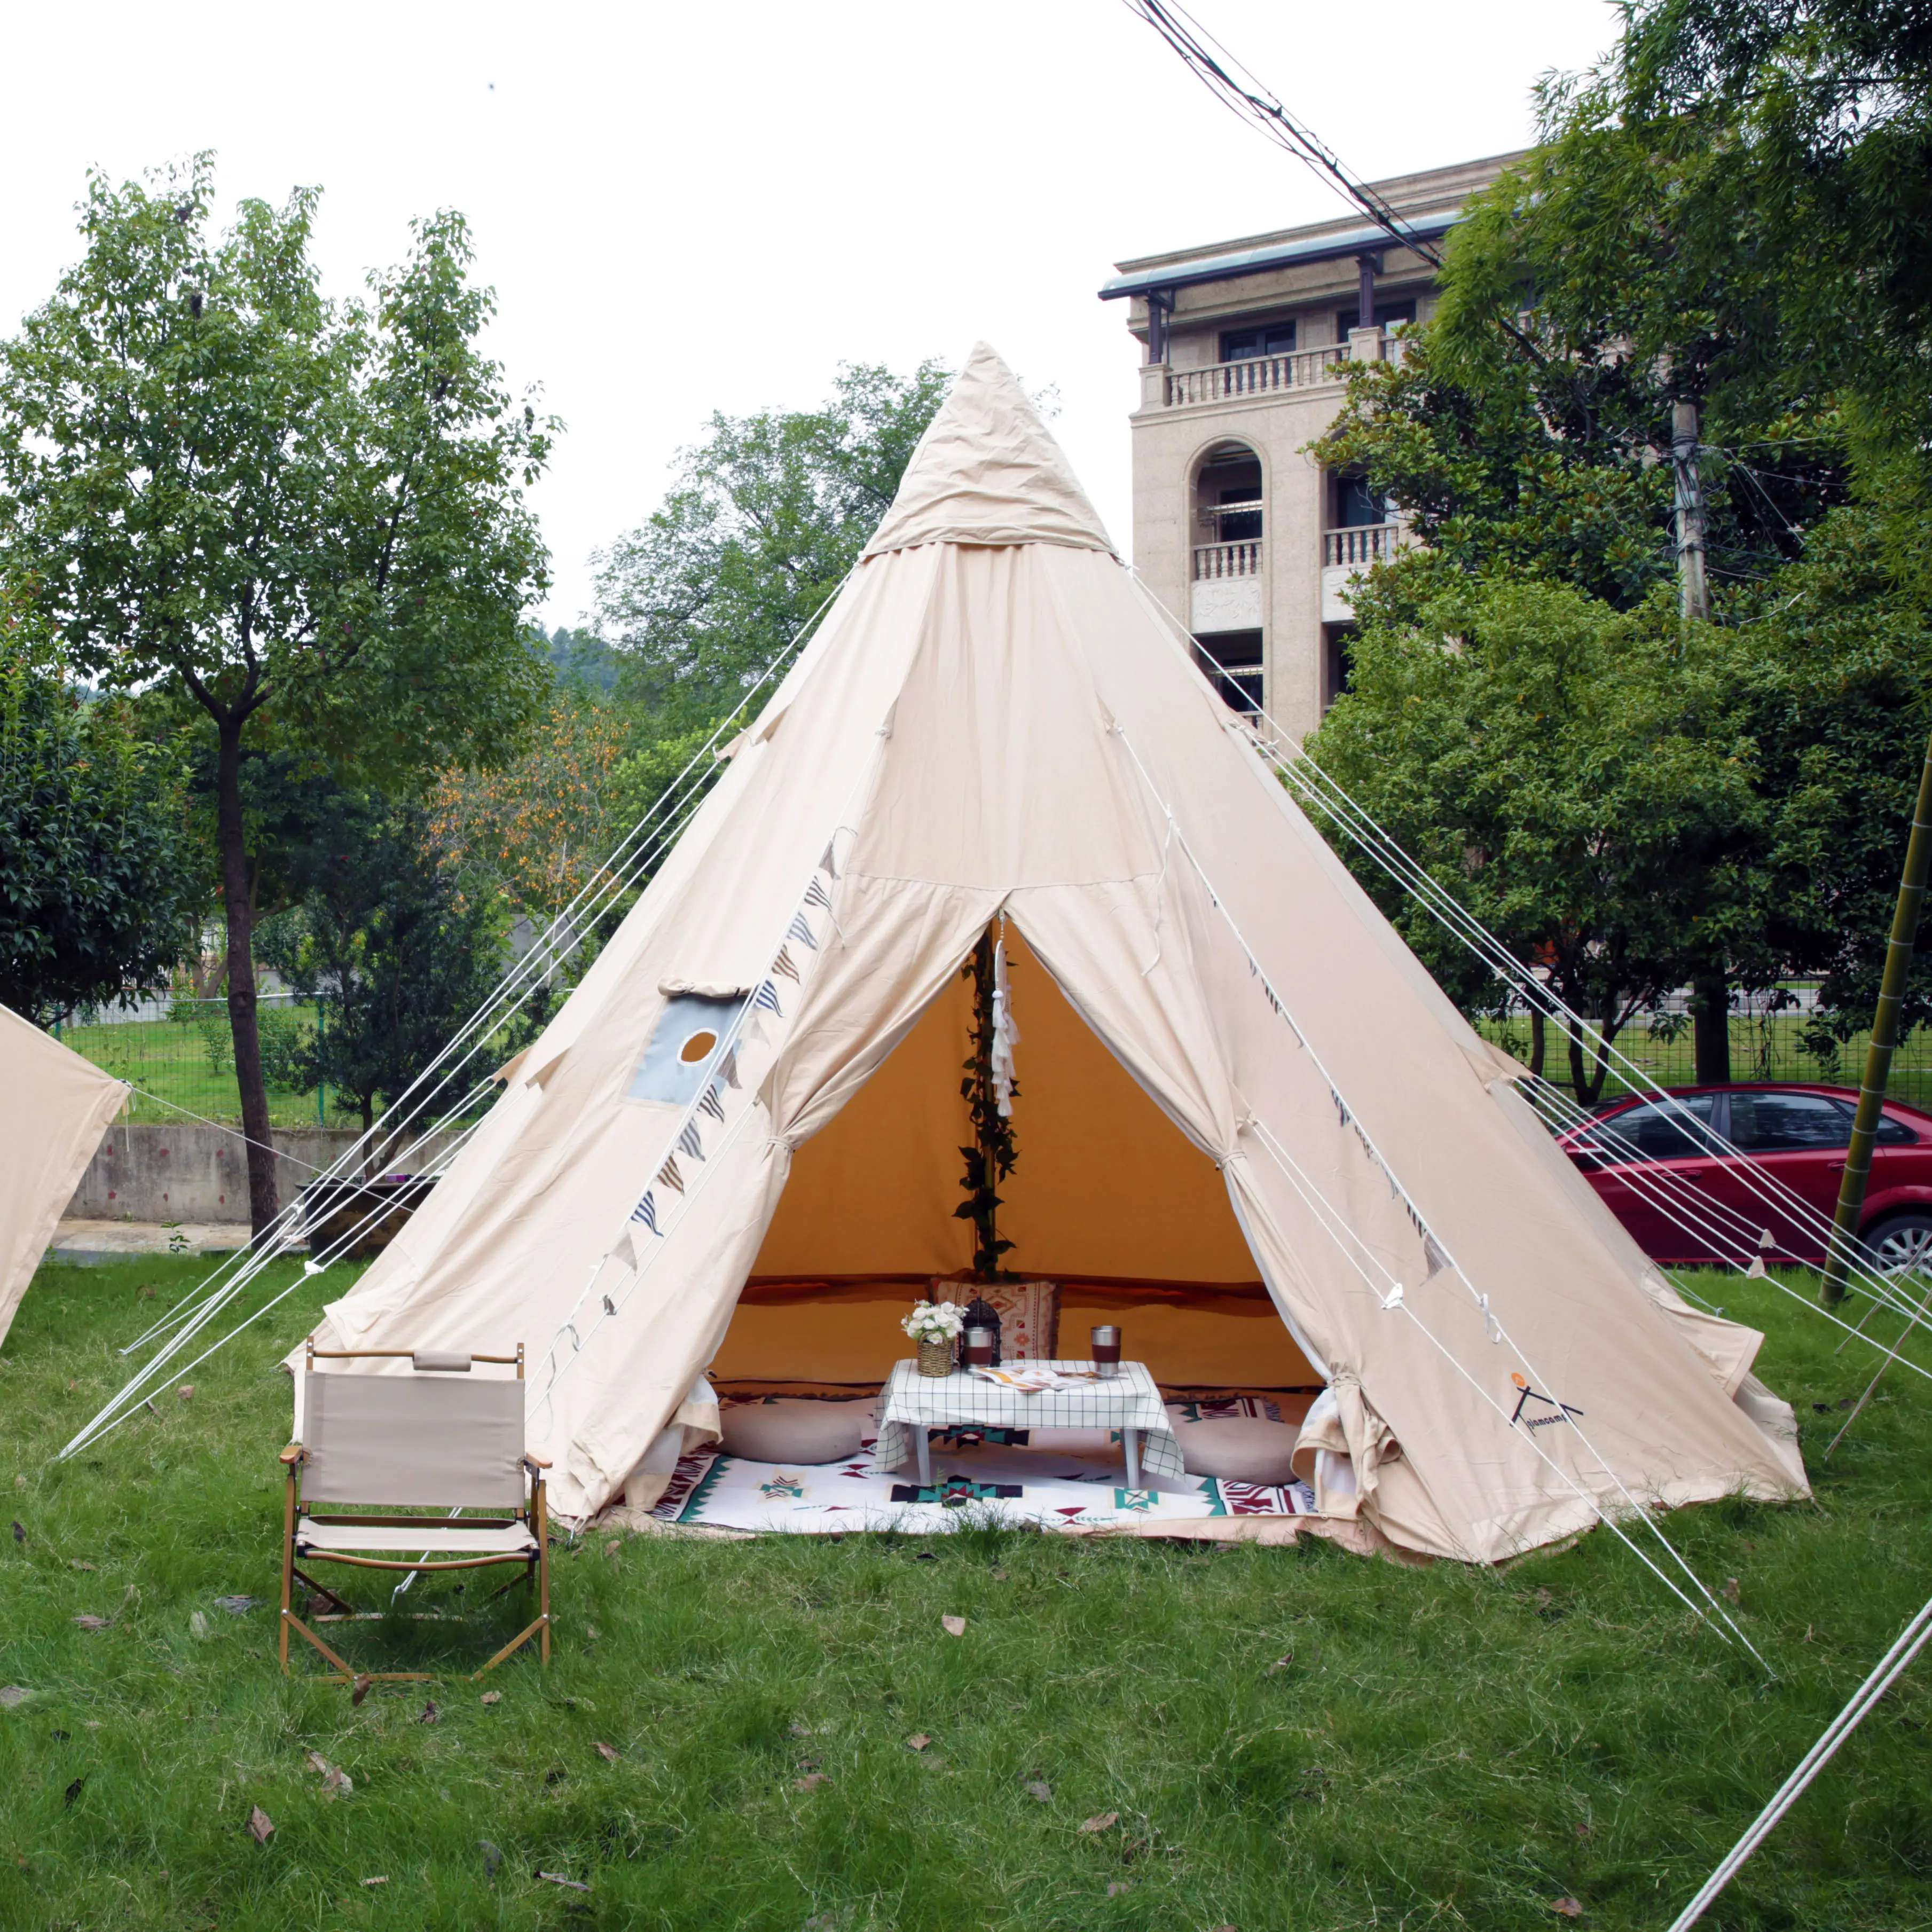 Luxe Hoge Kwaliteit 100% Katoenen Canvas 5M Outdoor Glamping Picknick Indian Piramide Camping Teepee Tipi Tent